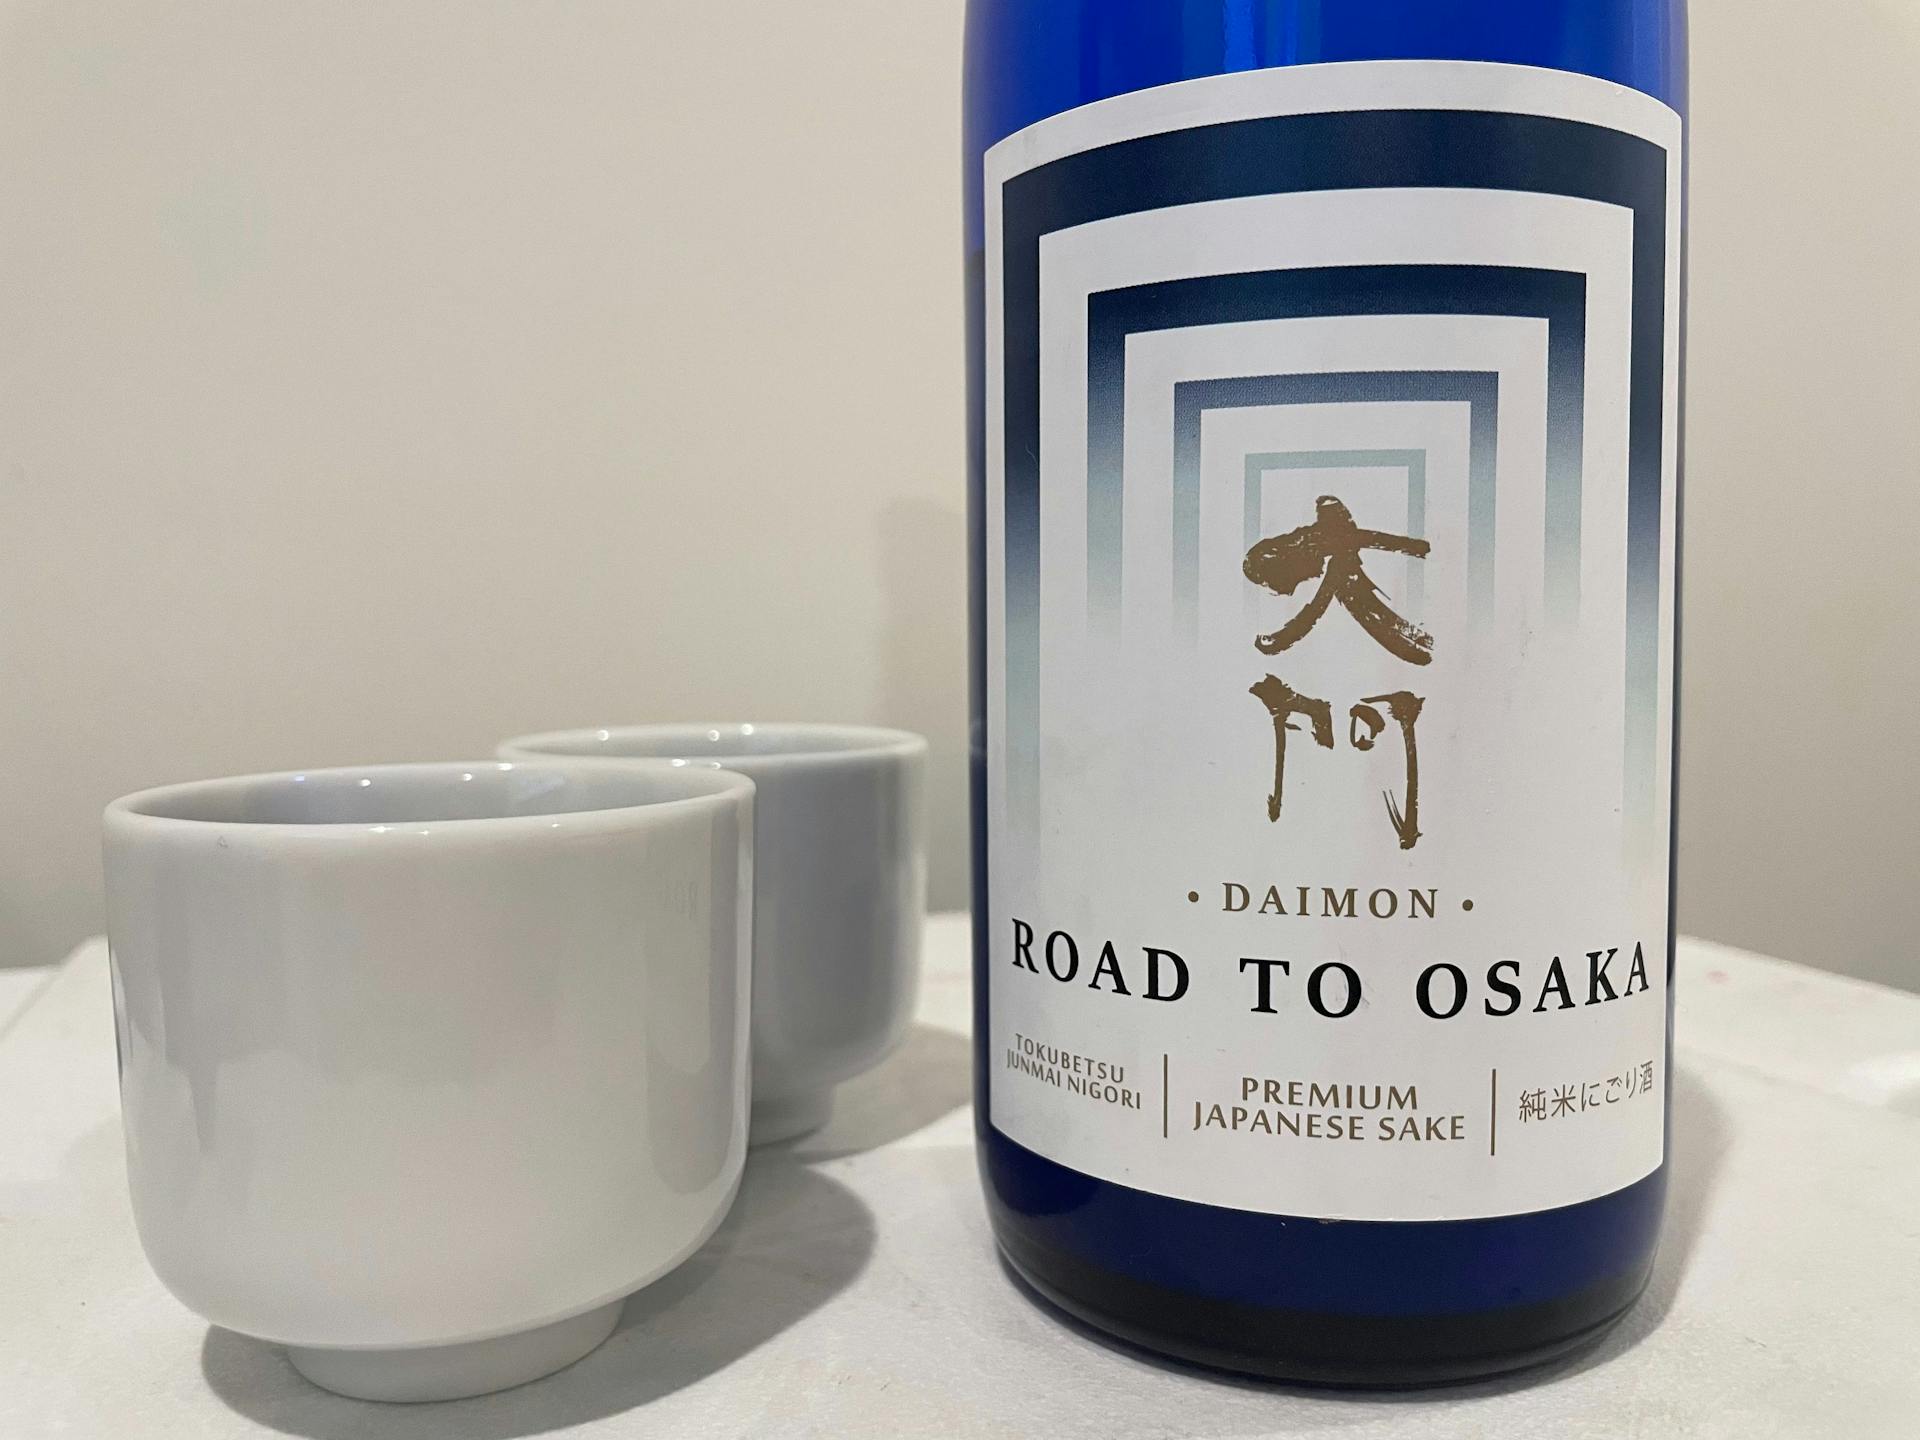 Bottle of Daimon Road to Osaka and sake cups